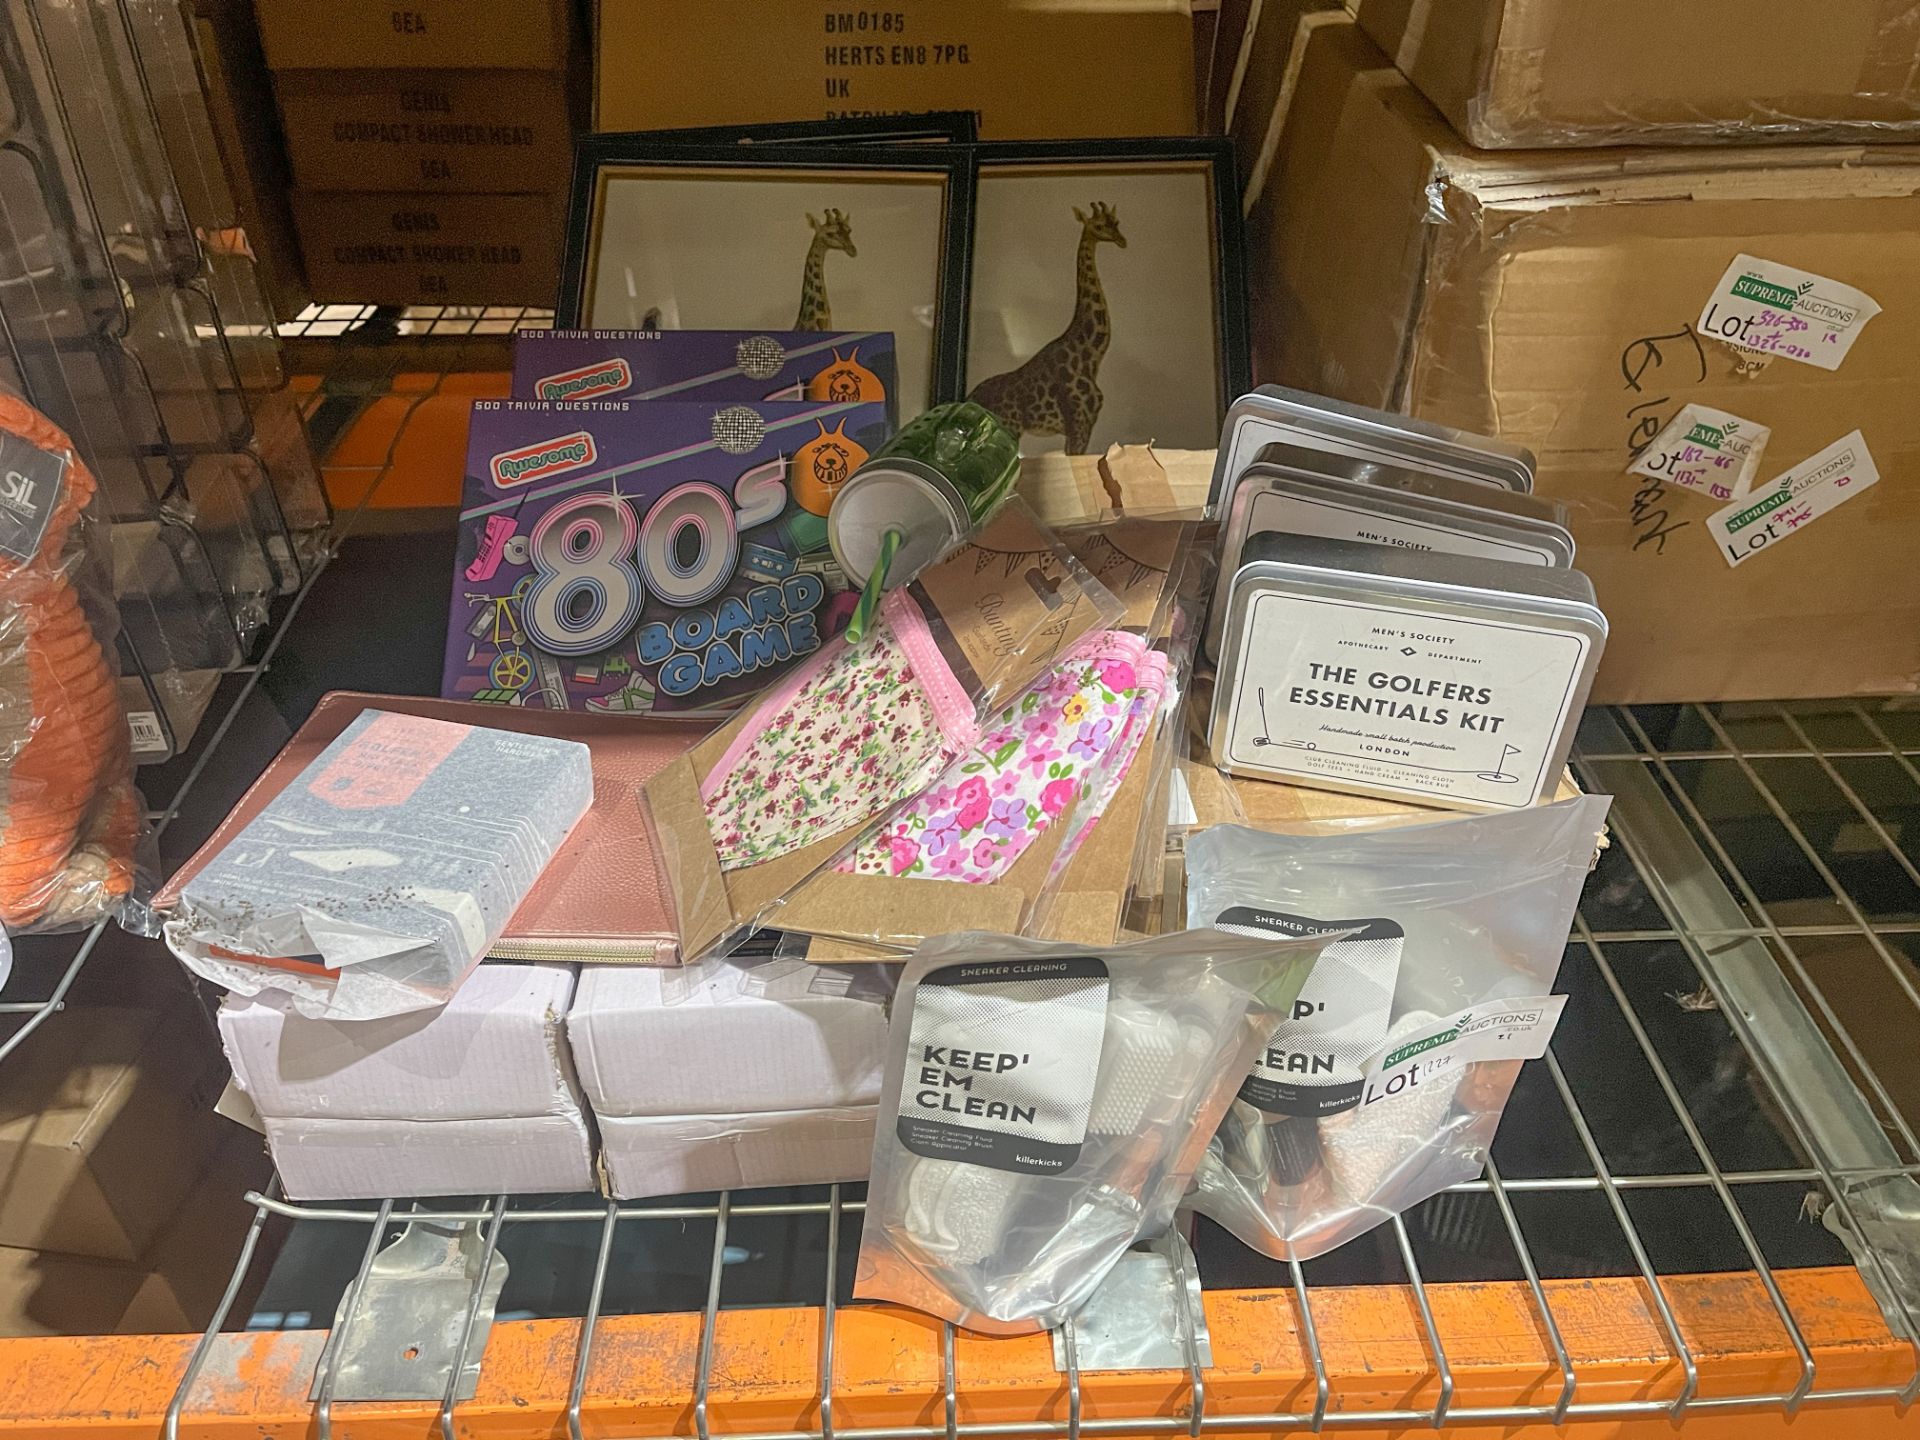 MIXED GIFTWARE LOT INCLUDING PICTURE FRAMES, BOARD GAMES, SNEAKER CLEANING KITS, GOLFING